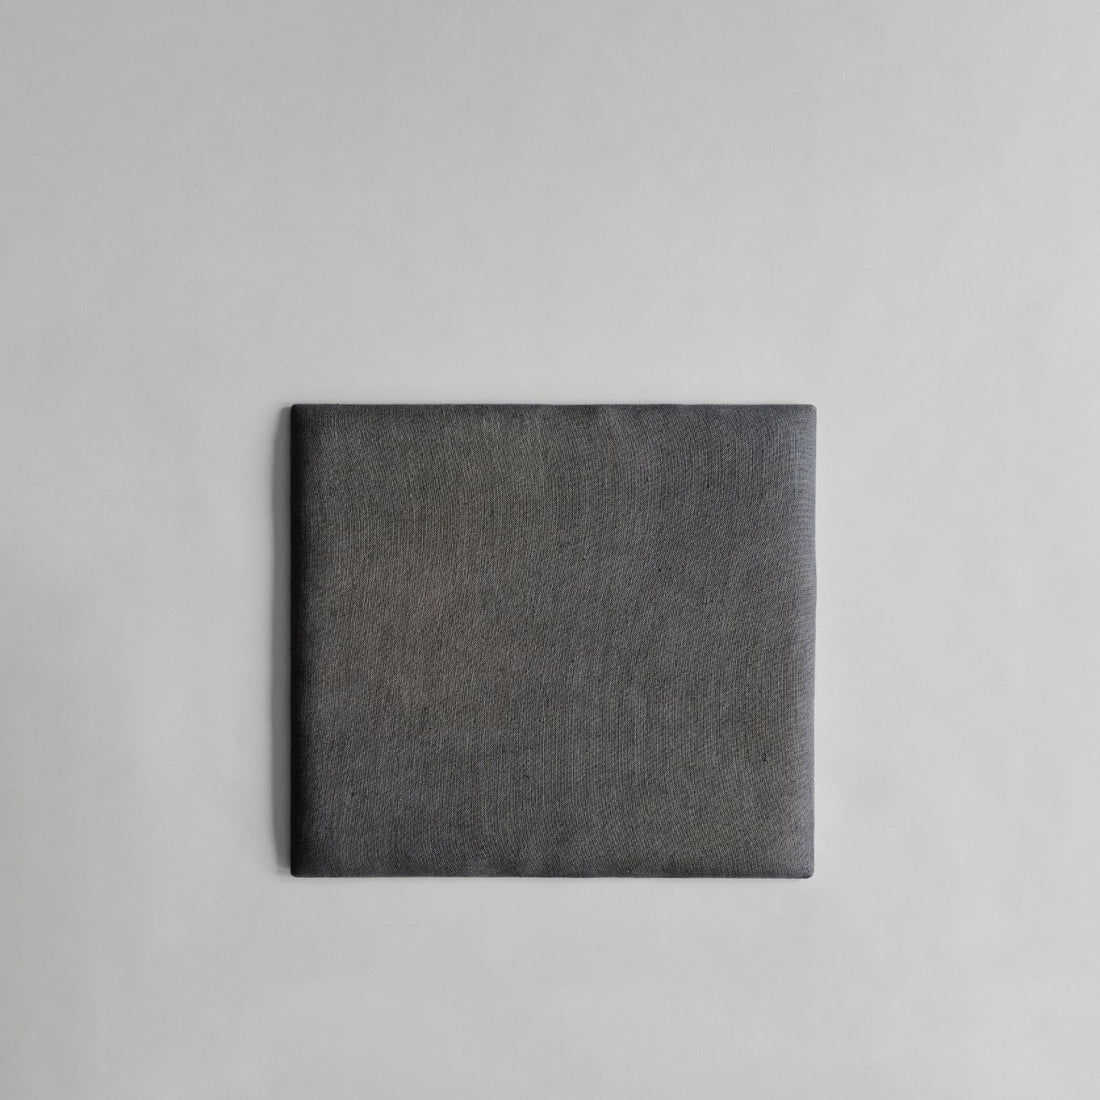 Brutus Dining Cushion | Charcoal